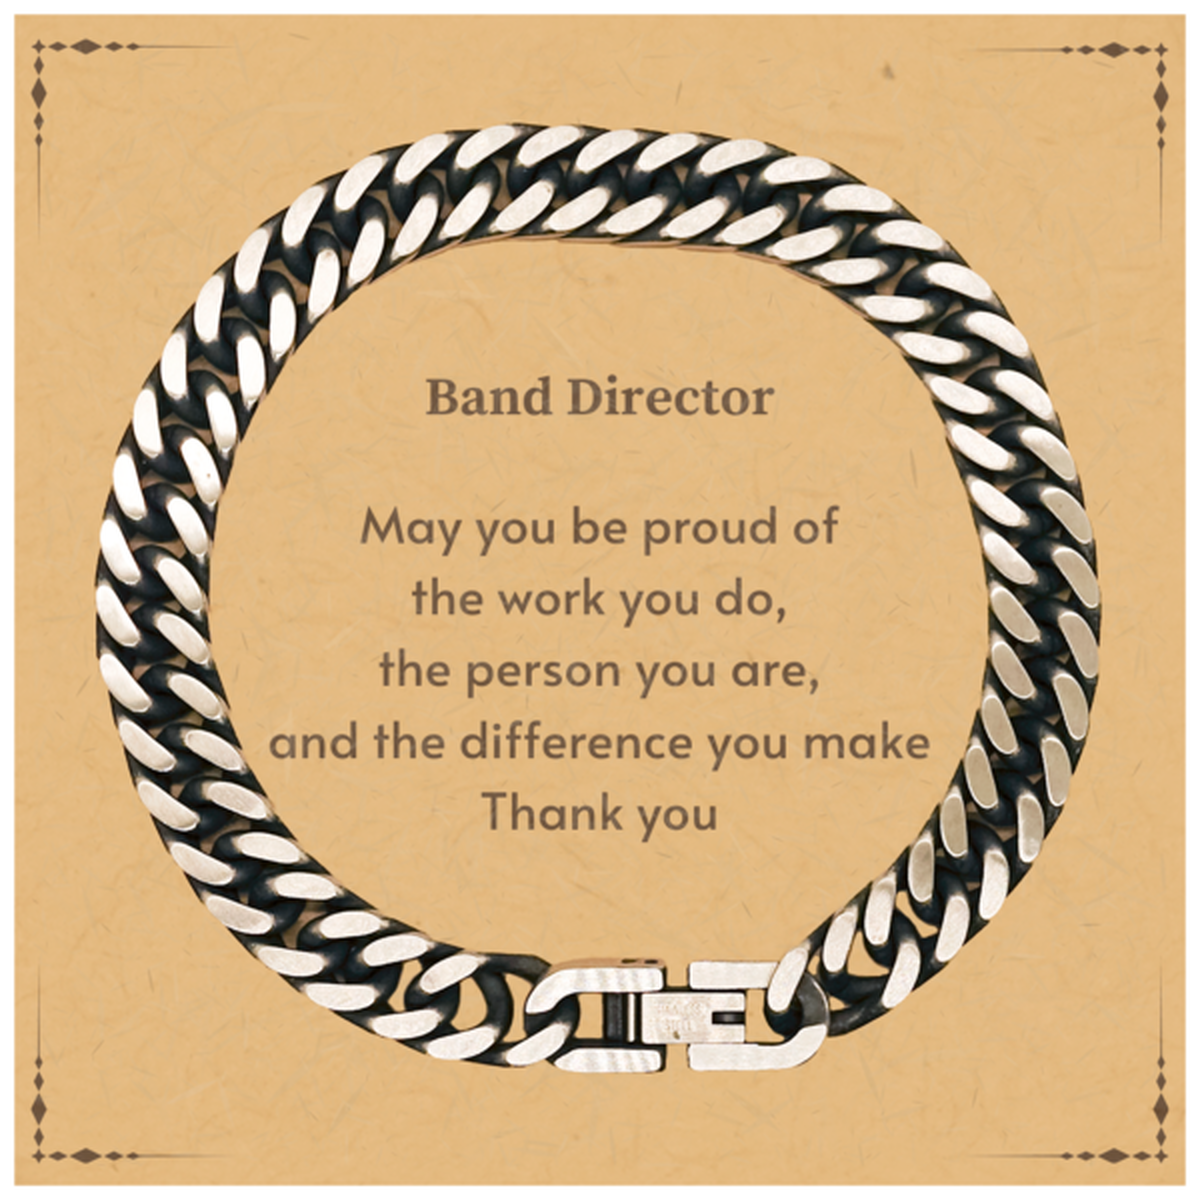 Heartwarming Cuban Link Chain Bracelet Retirement Coworkers Gifts for Band Director, Band Director May You be proud of the work you do, the person you are Gifts for Boss Men Women Friends